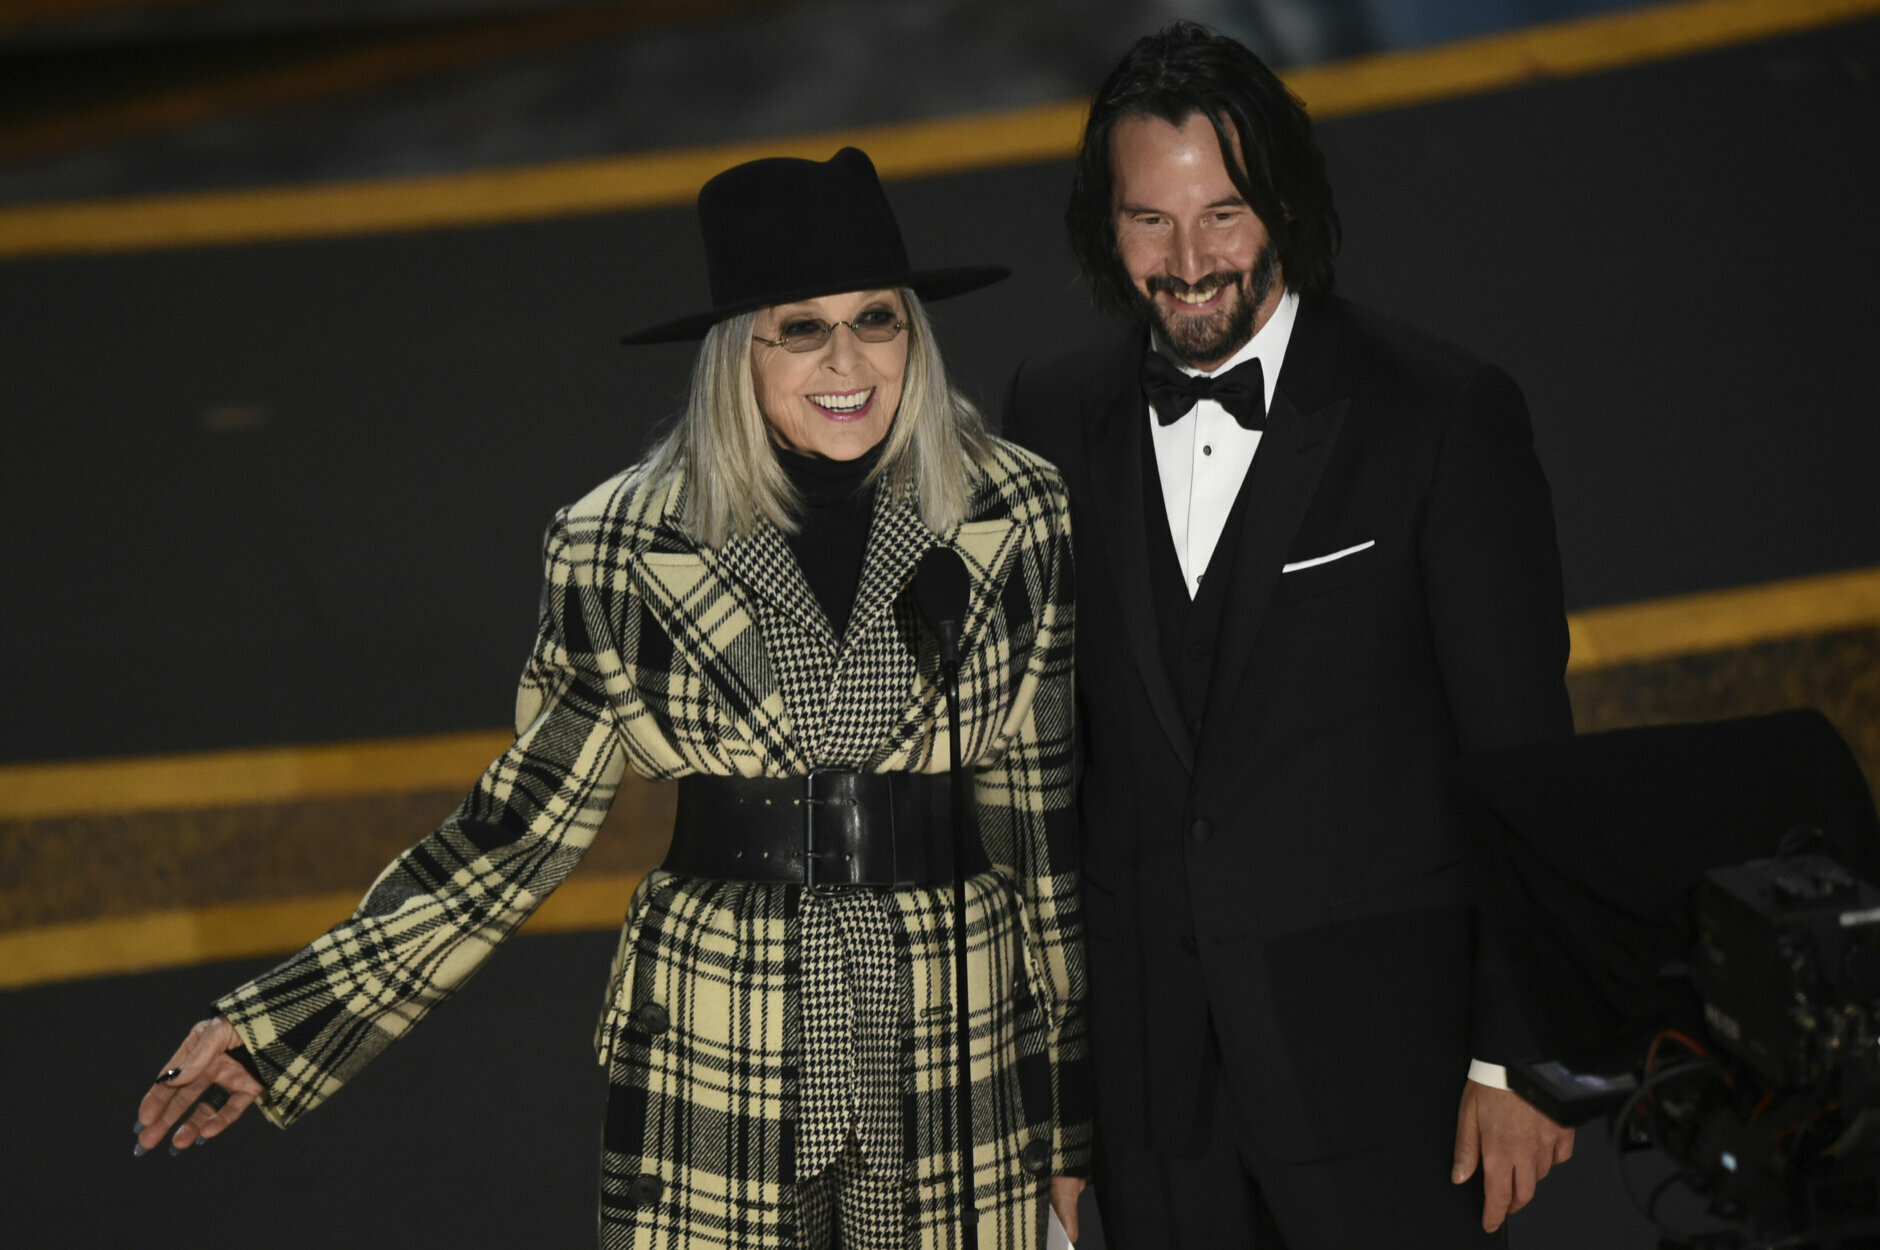 Diane Keaton, left, and Keanu Reeves appear on stage at the Oscars on Sunday, Feb. 9, 2020, at the Dolby Theatre in Los Angeles. (AP Photo/Chris Pizzello)